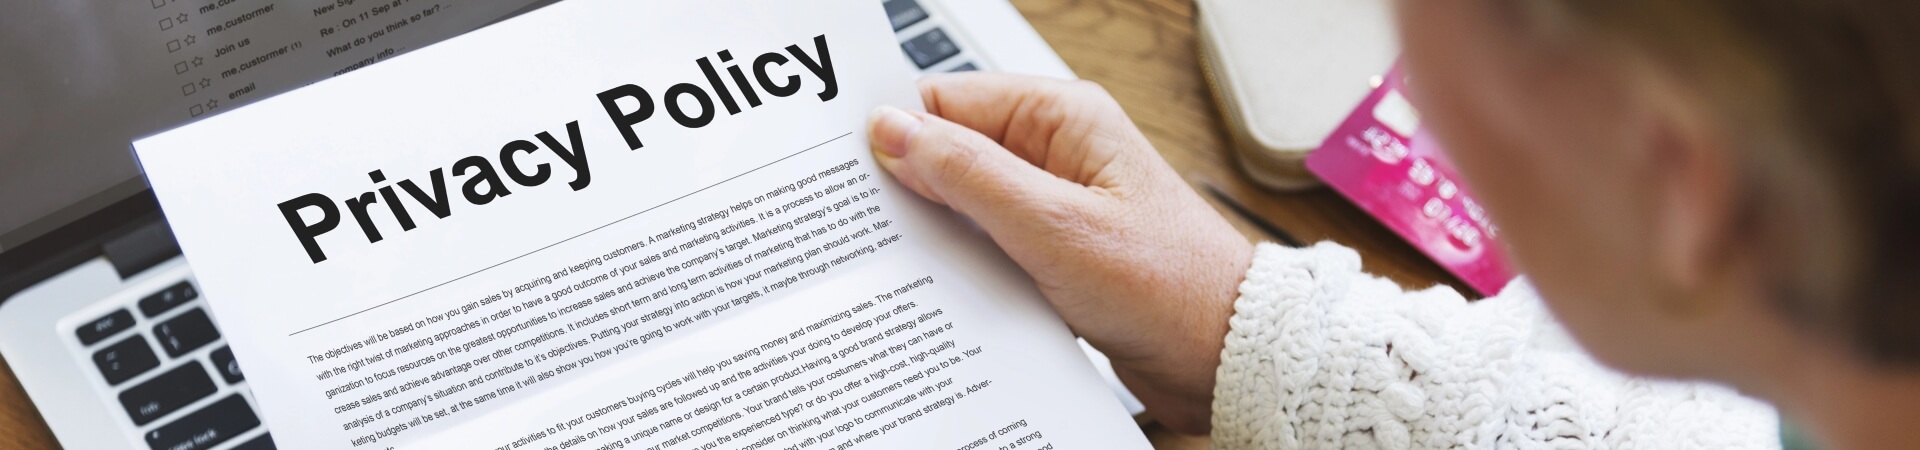 privacy-policy-banner-cas-and-associates